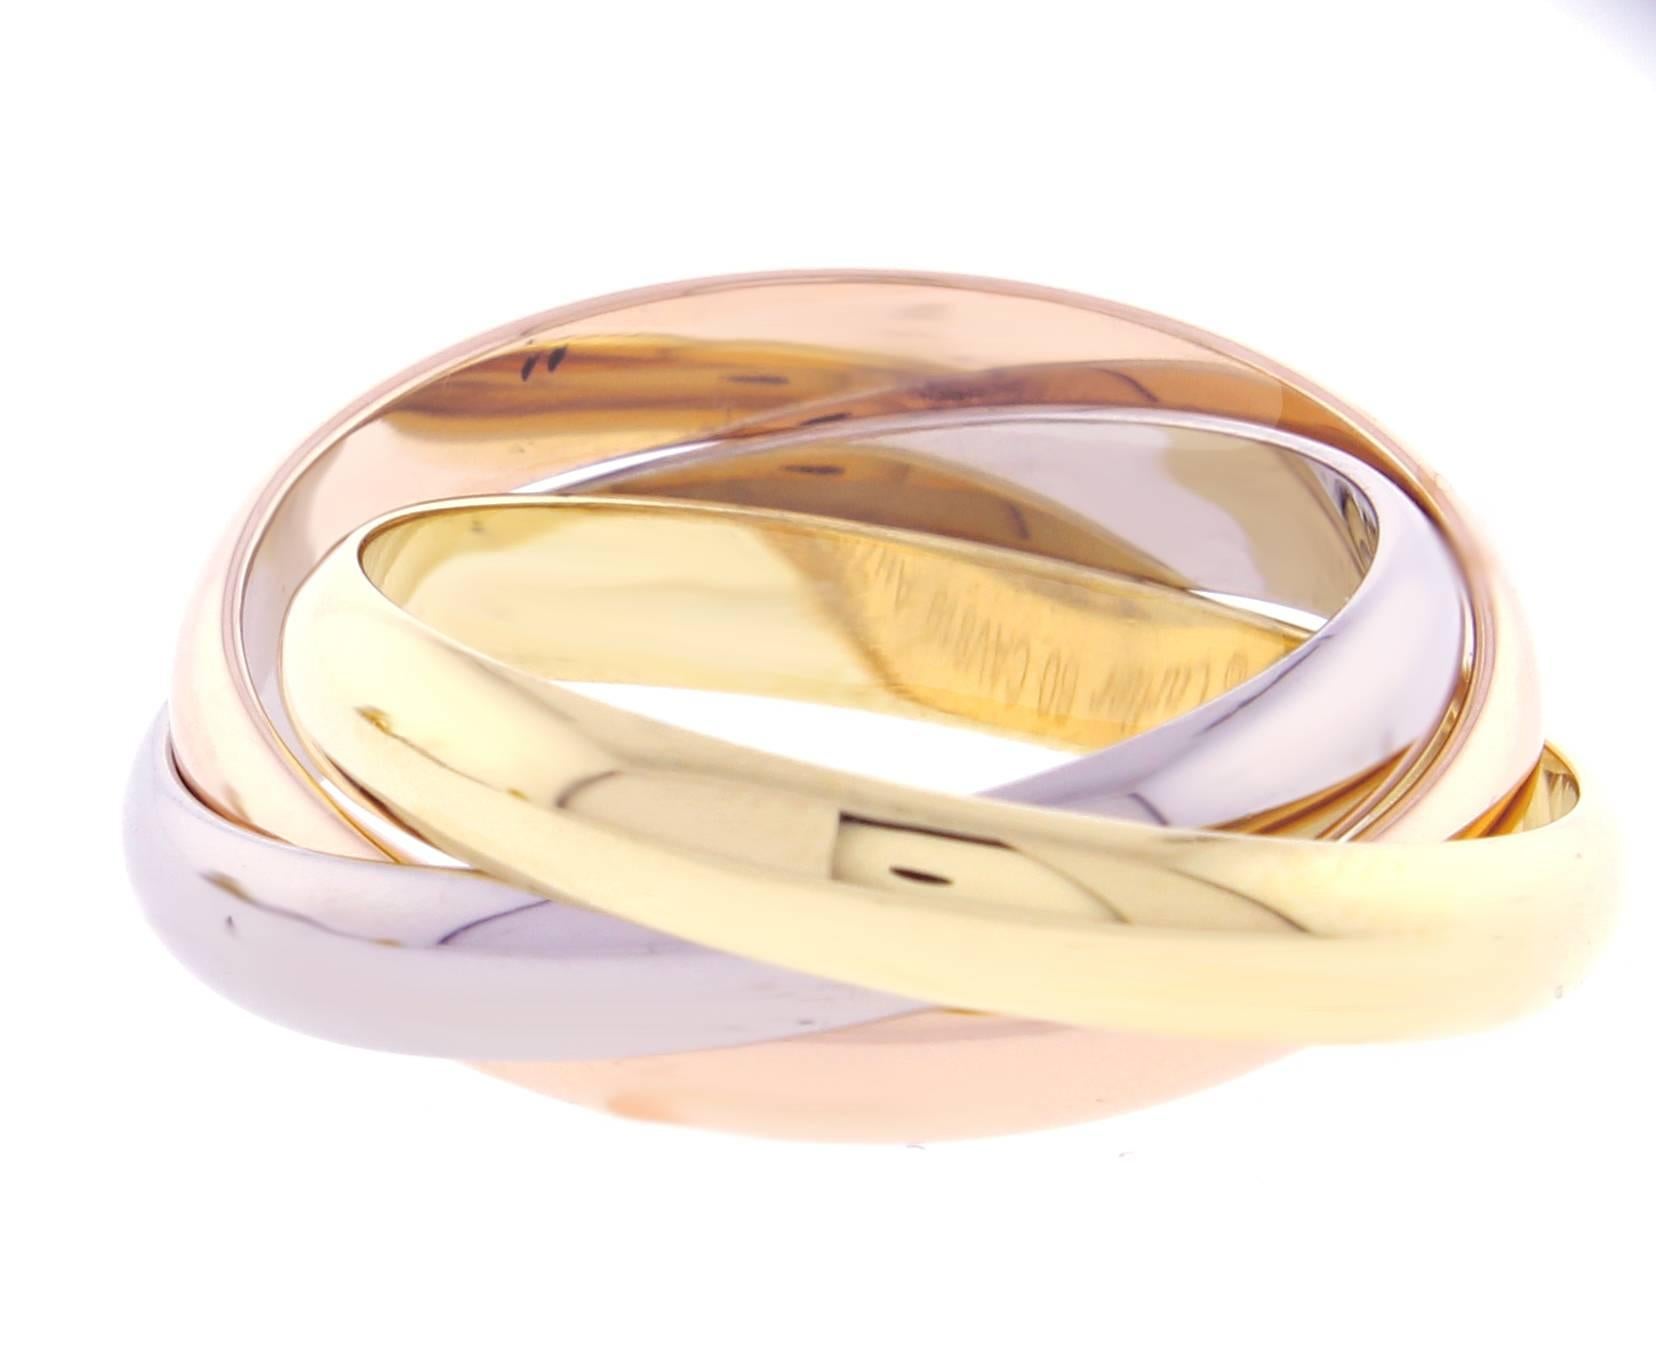 Three bands. Three colors. Pink gold, yellow gold and white gold, intertwined in a display of mystery and harmony.Cartier's timeless trinity ring.  Size 60 US 9 3.2mm wide bands
Original boxes certificate of authenticity